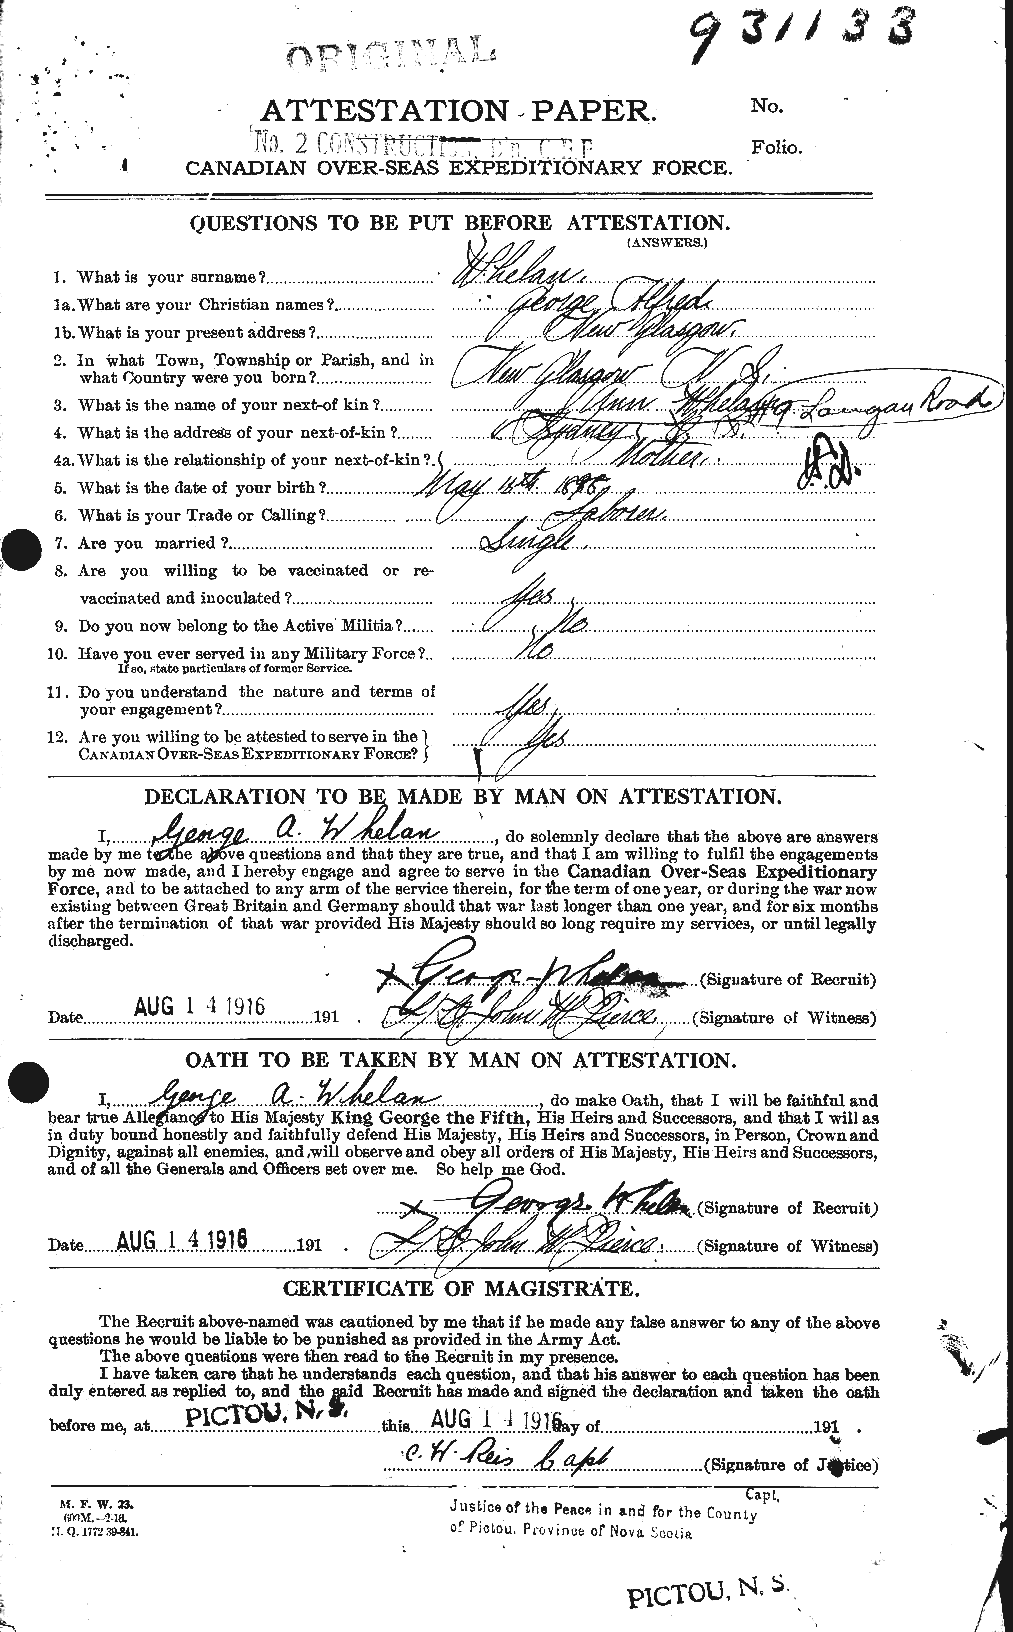 Personnel Records of the First World War - CEF 667546a